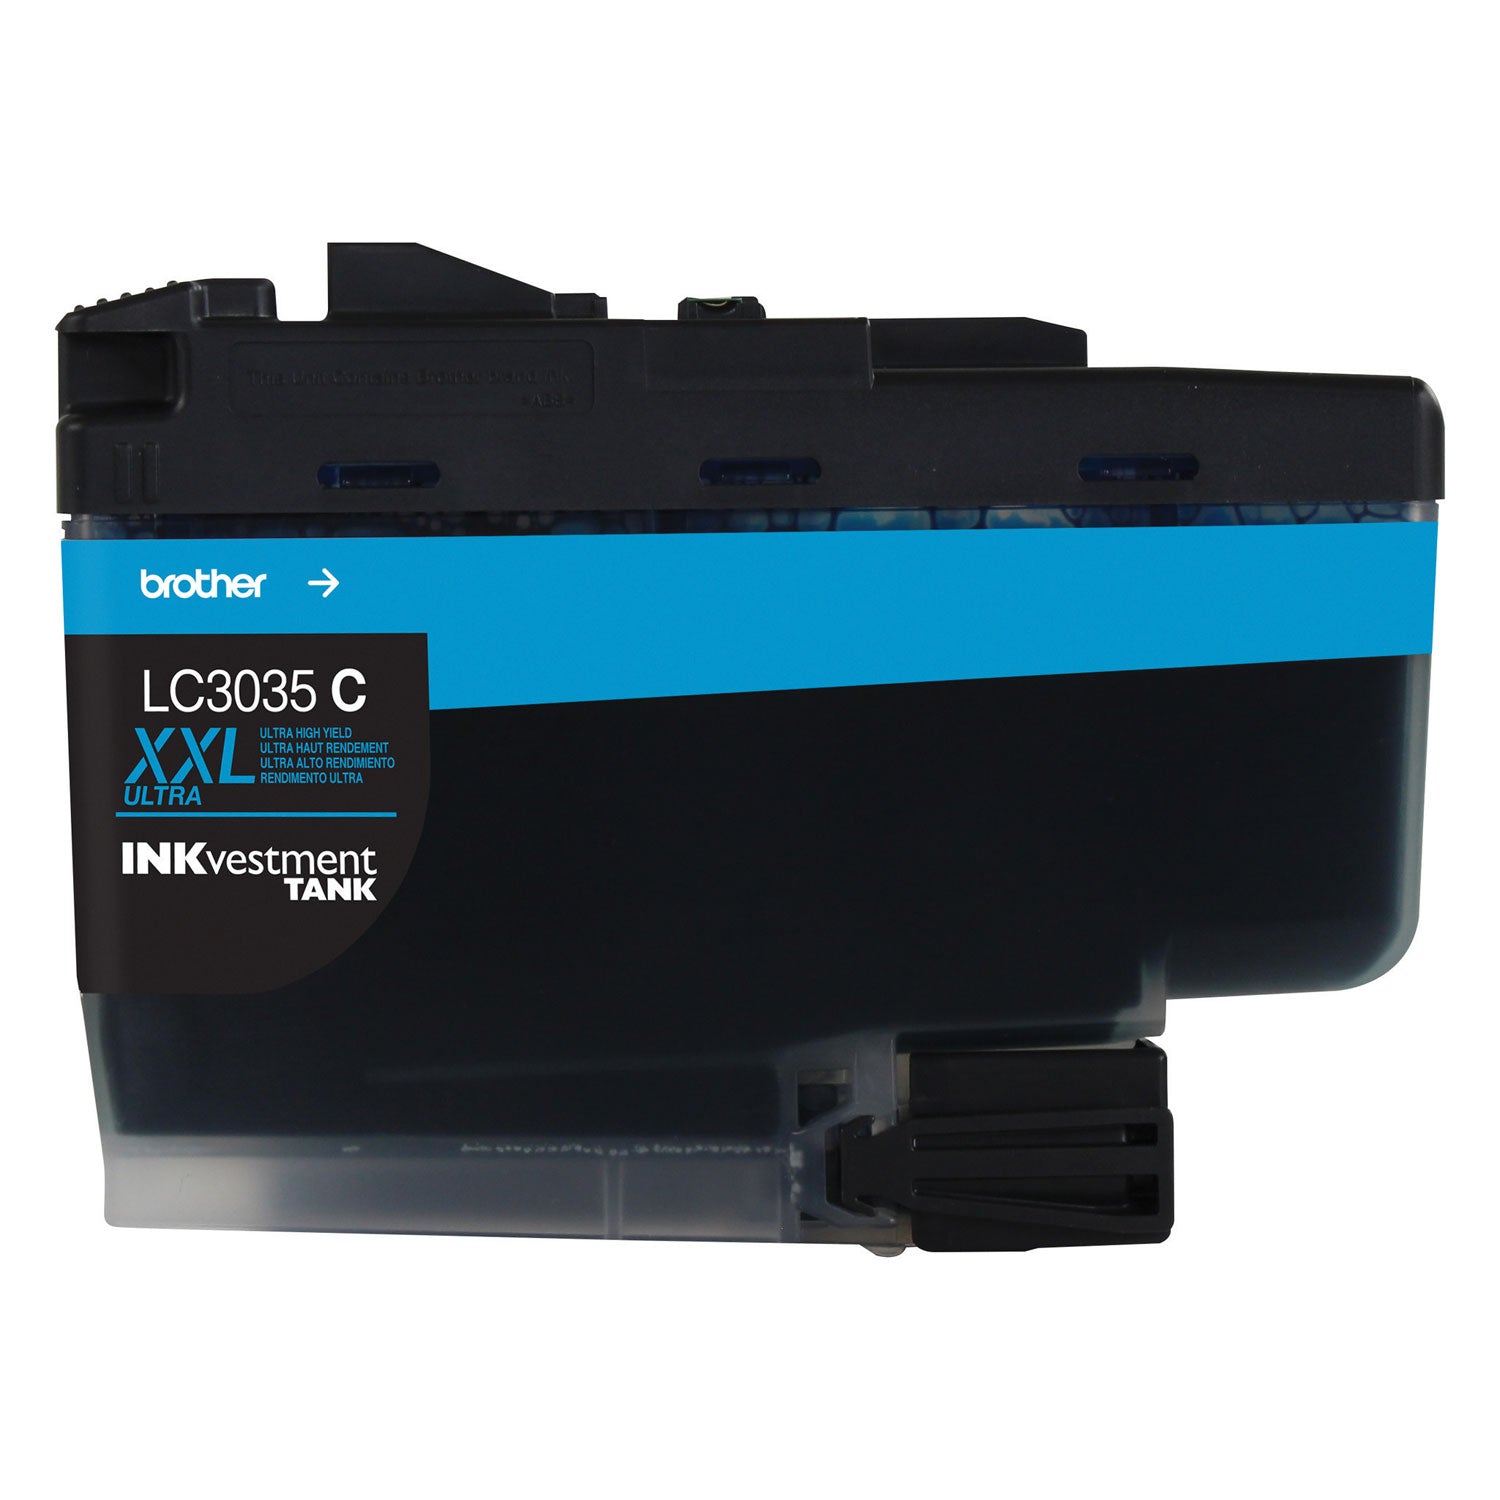 lc3035c-inkvestment-ultra-high-yield-ink-5000-page-yield-cyan_brtlc3035c - 1